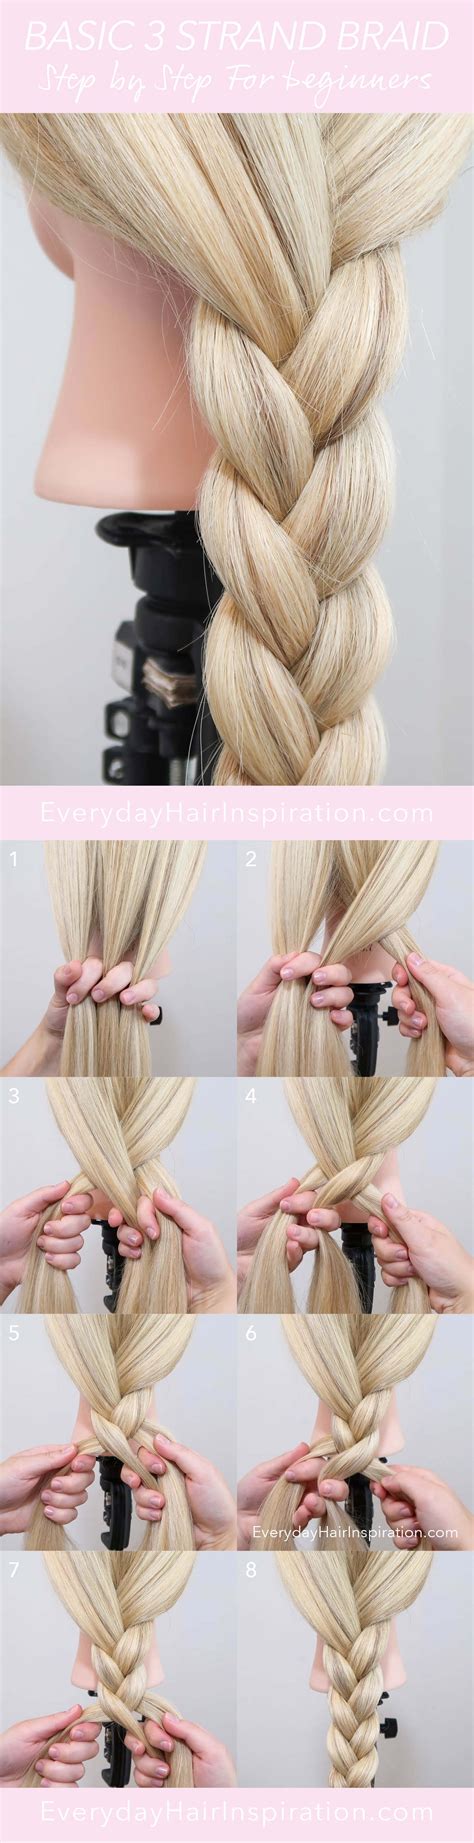 Unique How To Put Your Hair Into A Braid With Simple Style